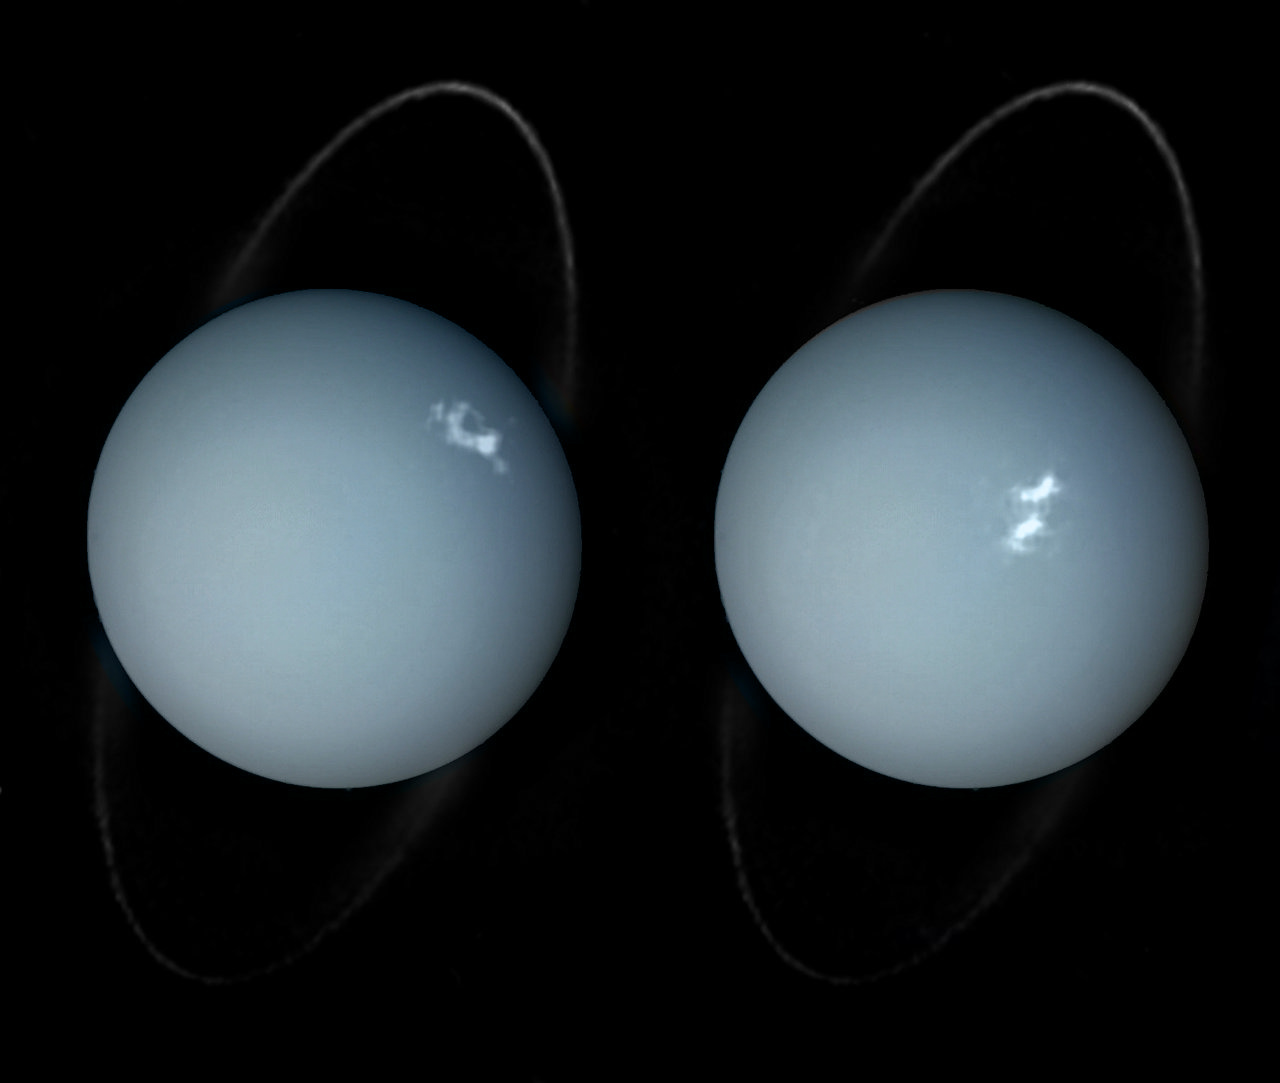 Uranus is hazy from all the extra methane gas 